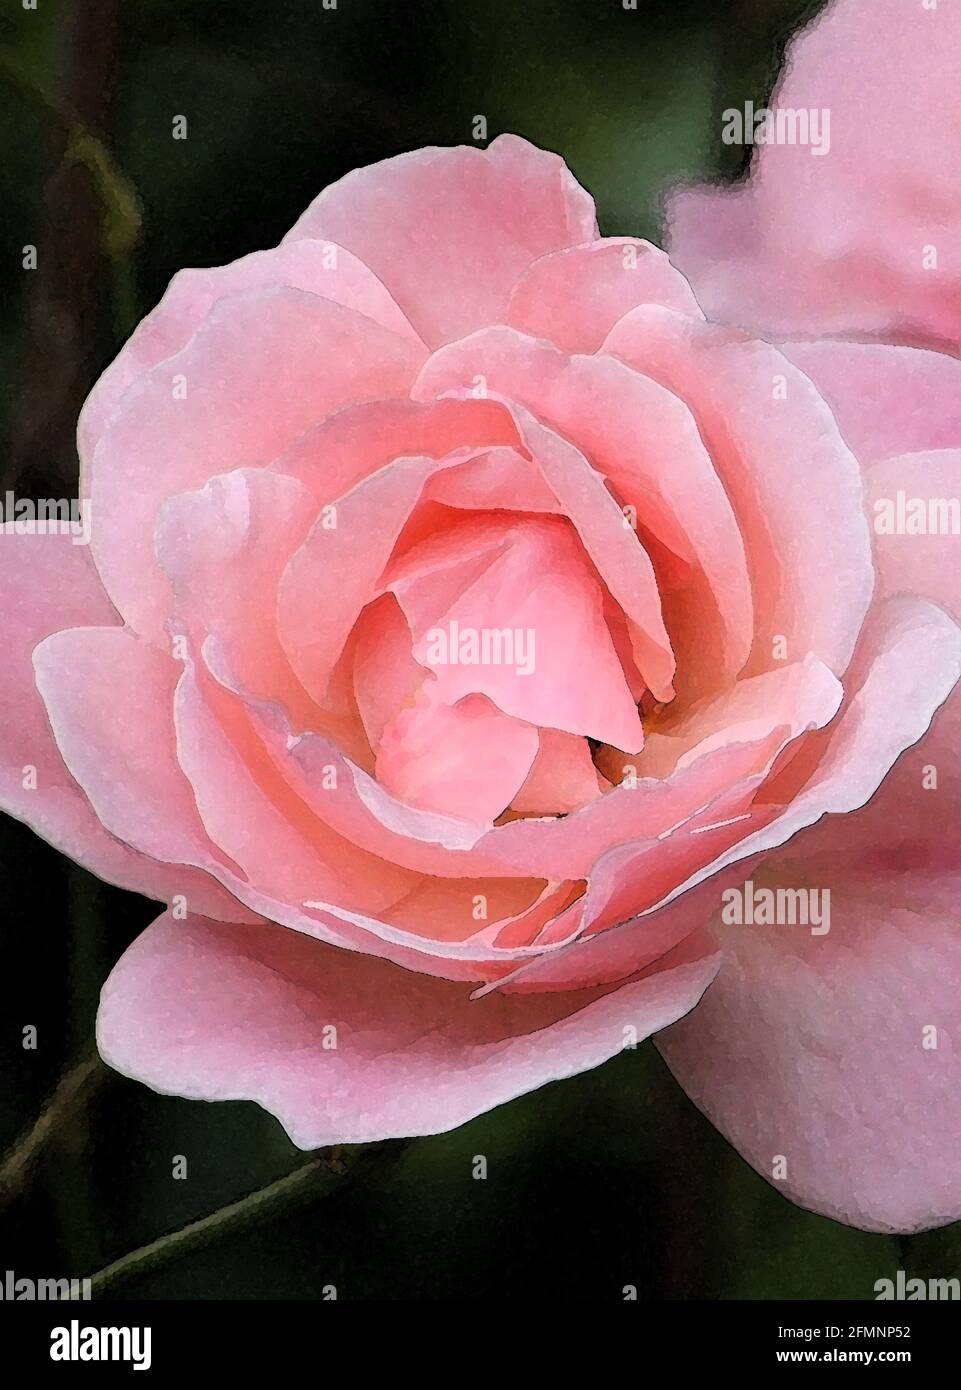 Perfect Rose (Rosa 'Queen Elizabeth') One of Forty-two Iconic Images of English Garden Flowers, Wildflowers and Rural Landscapes. Stock Photo